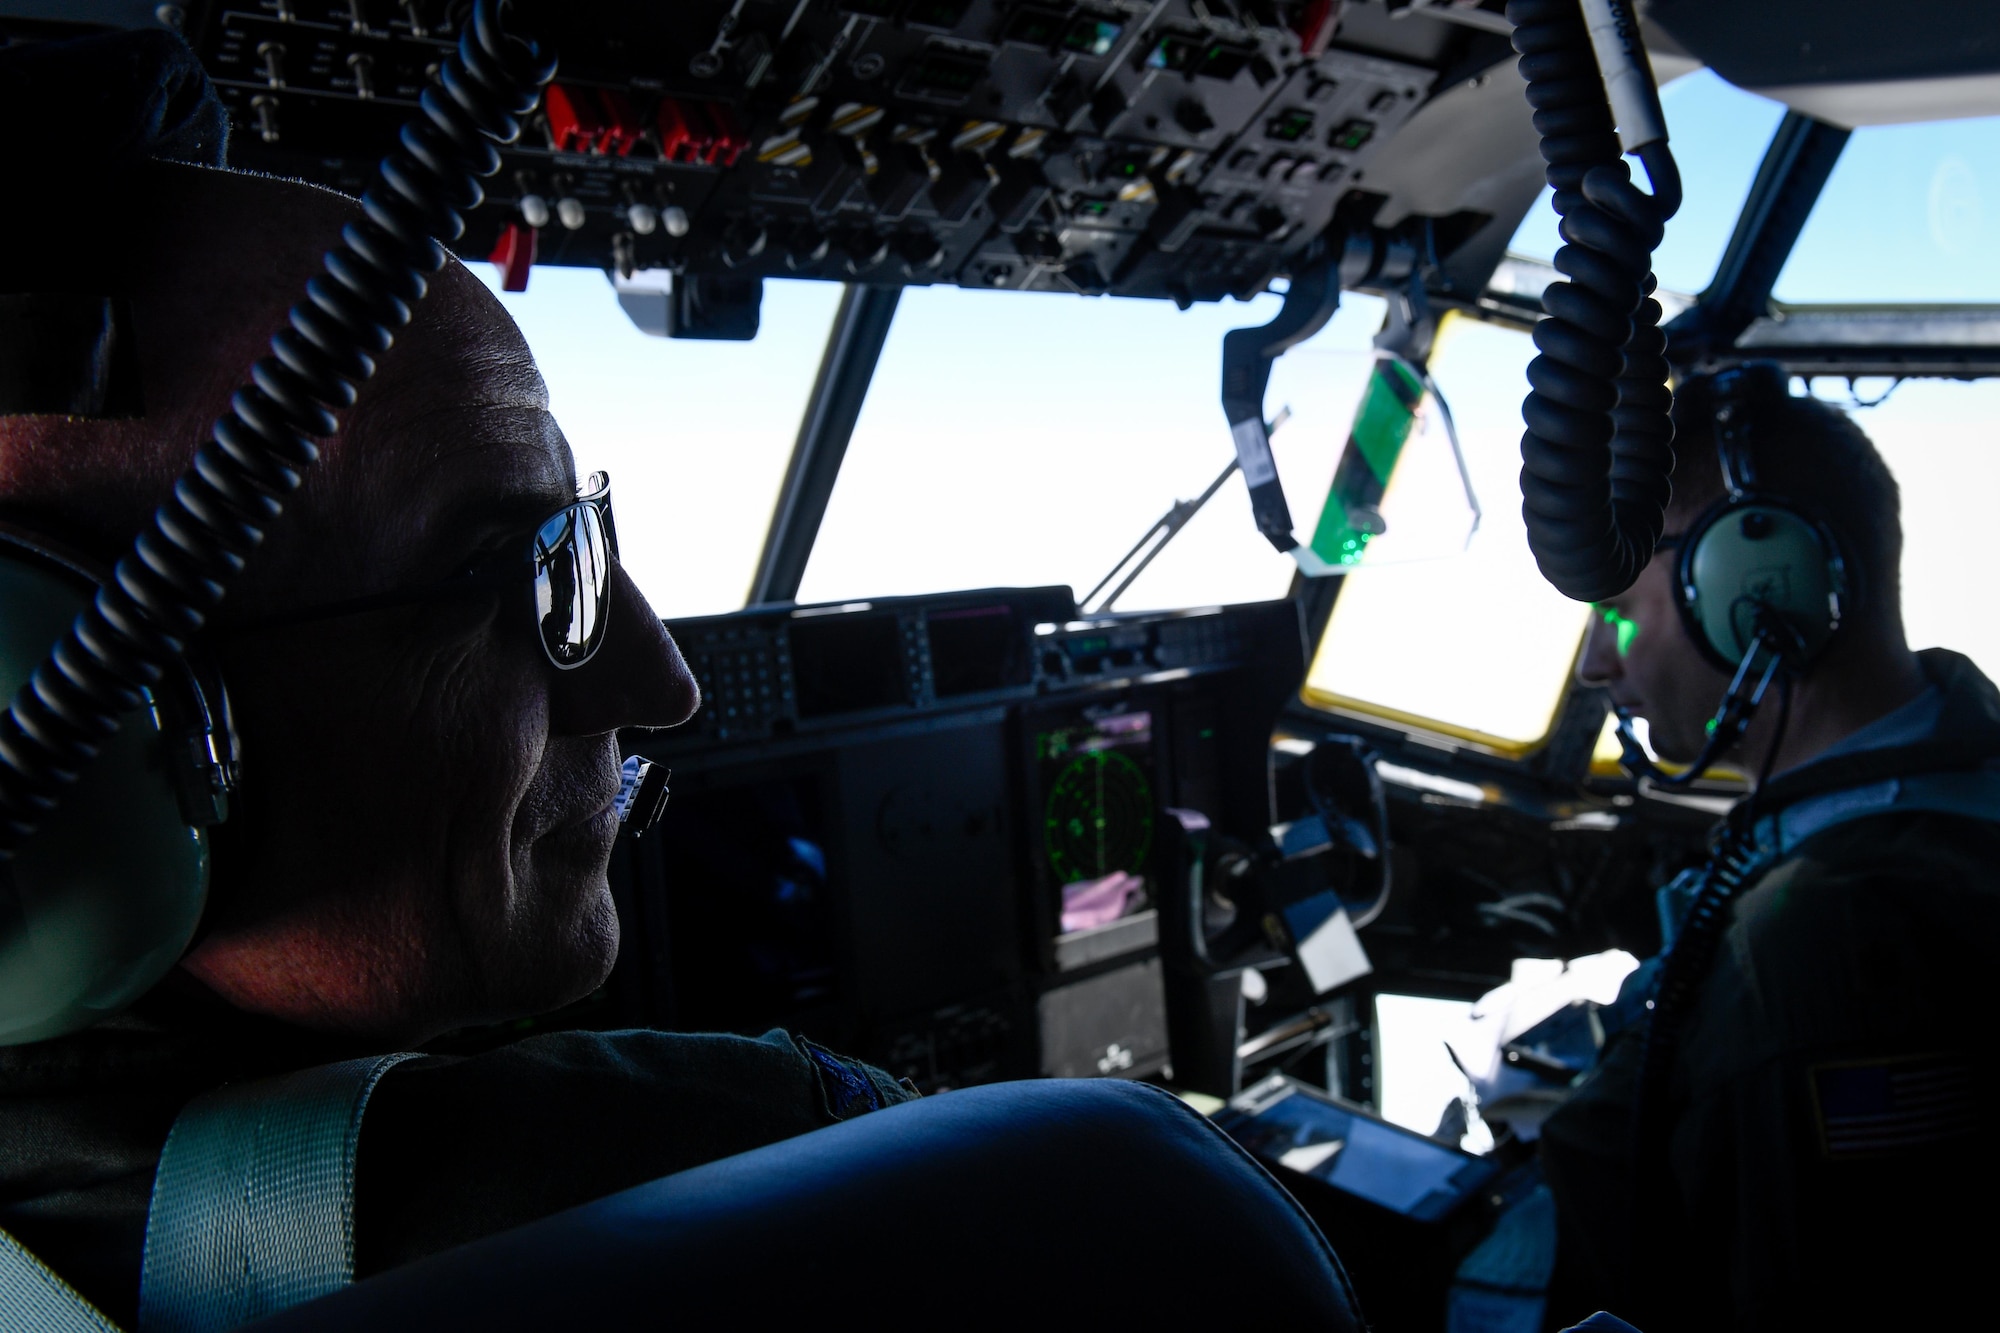 Col. Kenneth Moss, 374th Airlift Wing commander, communicates with his crew members over the Pacific Ocean, March 6, 2017. This is the first C-130J to be assigned to Pacific Air Forces. Yokota serves as the primary Western Pacific airlift hub for U.S. Air Force peacetime and contingency operations. Missions include tactical air land, airdrop, aeromedical evacuation, special operations and distinguished visitor airlift. (U.S. Air Force photo by Staff Sgt. Michael Smith)